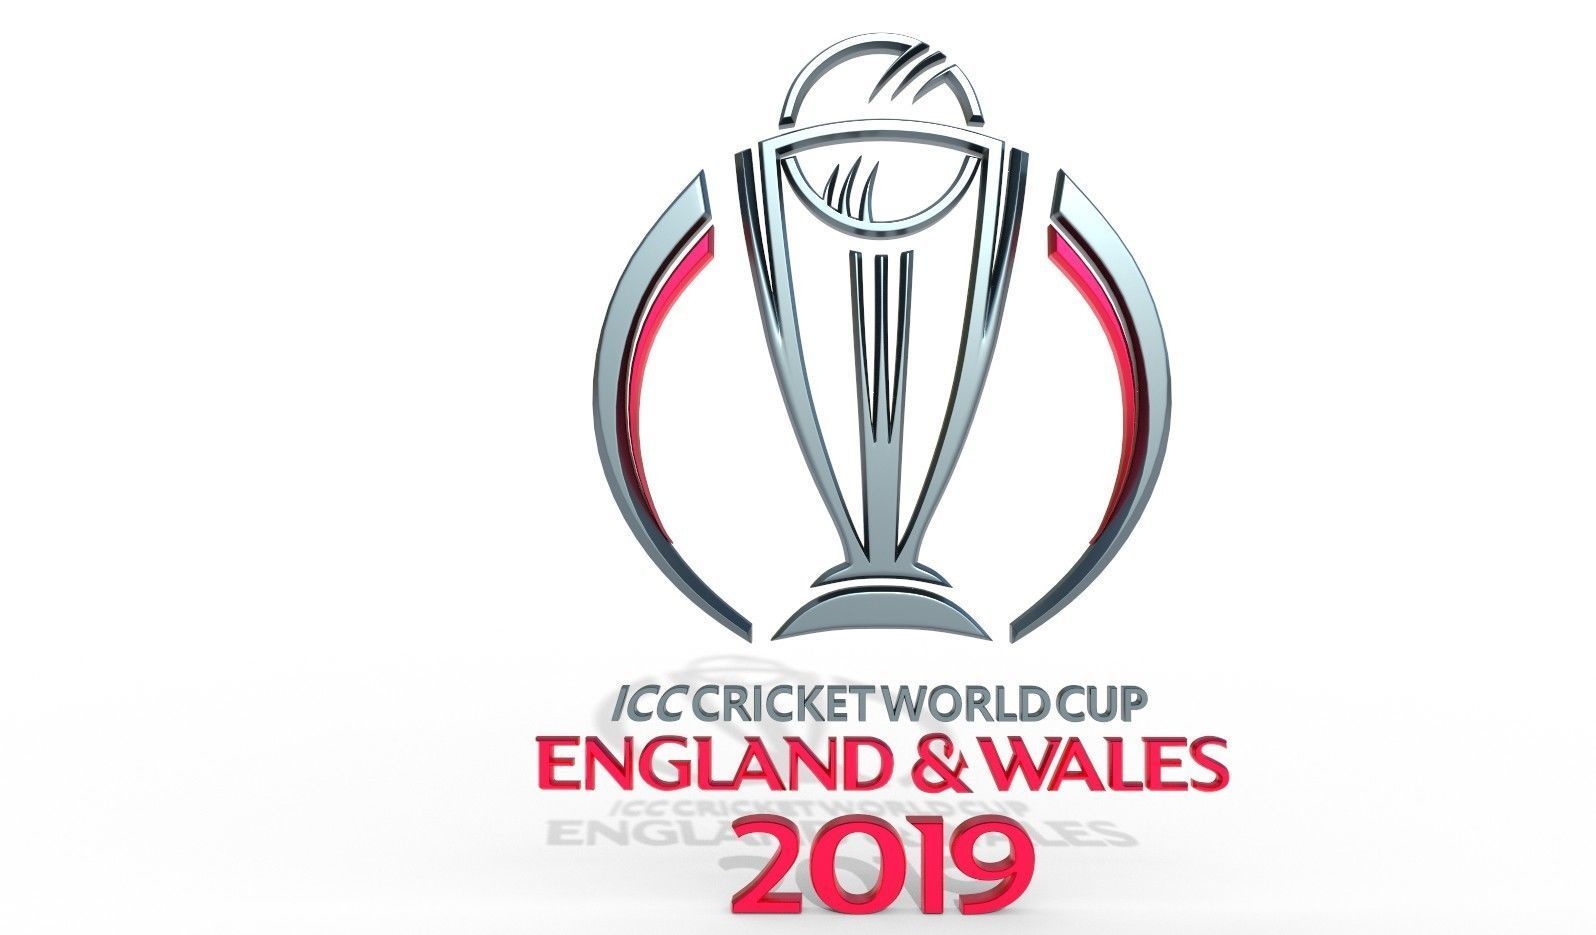 Get England ICC World Cup tickets using Emirates Skywards miles Live